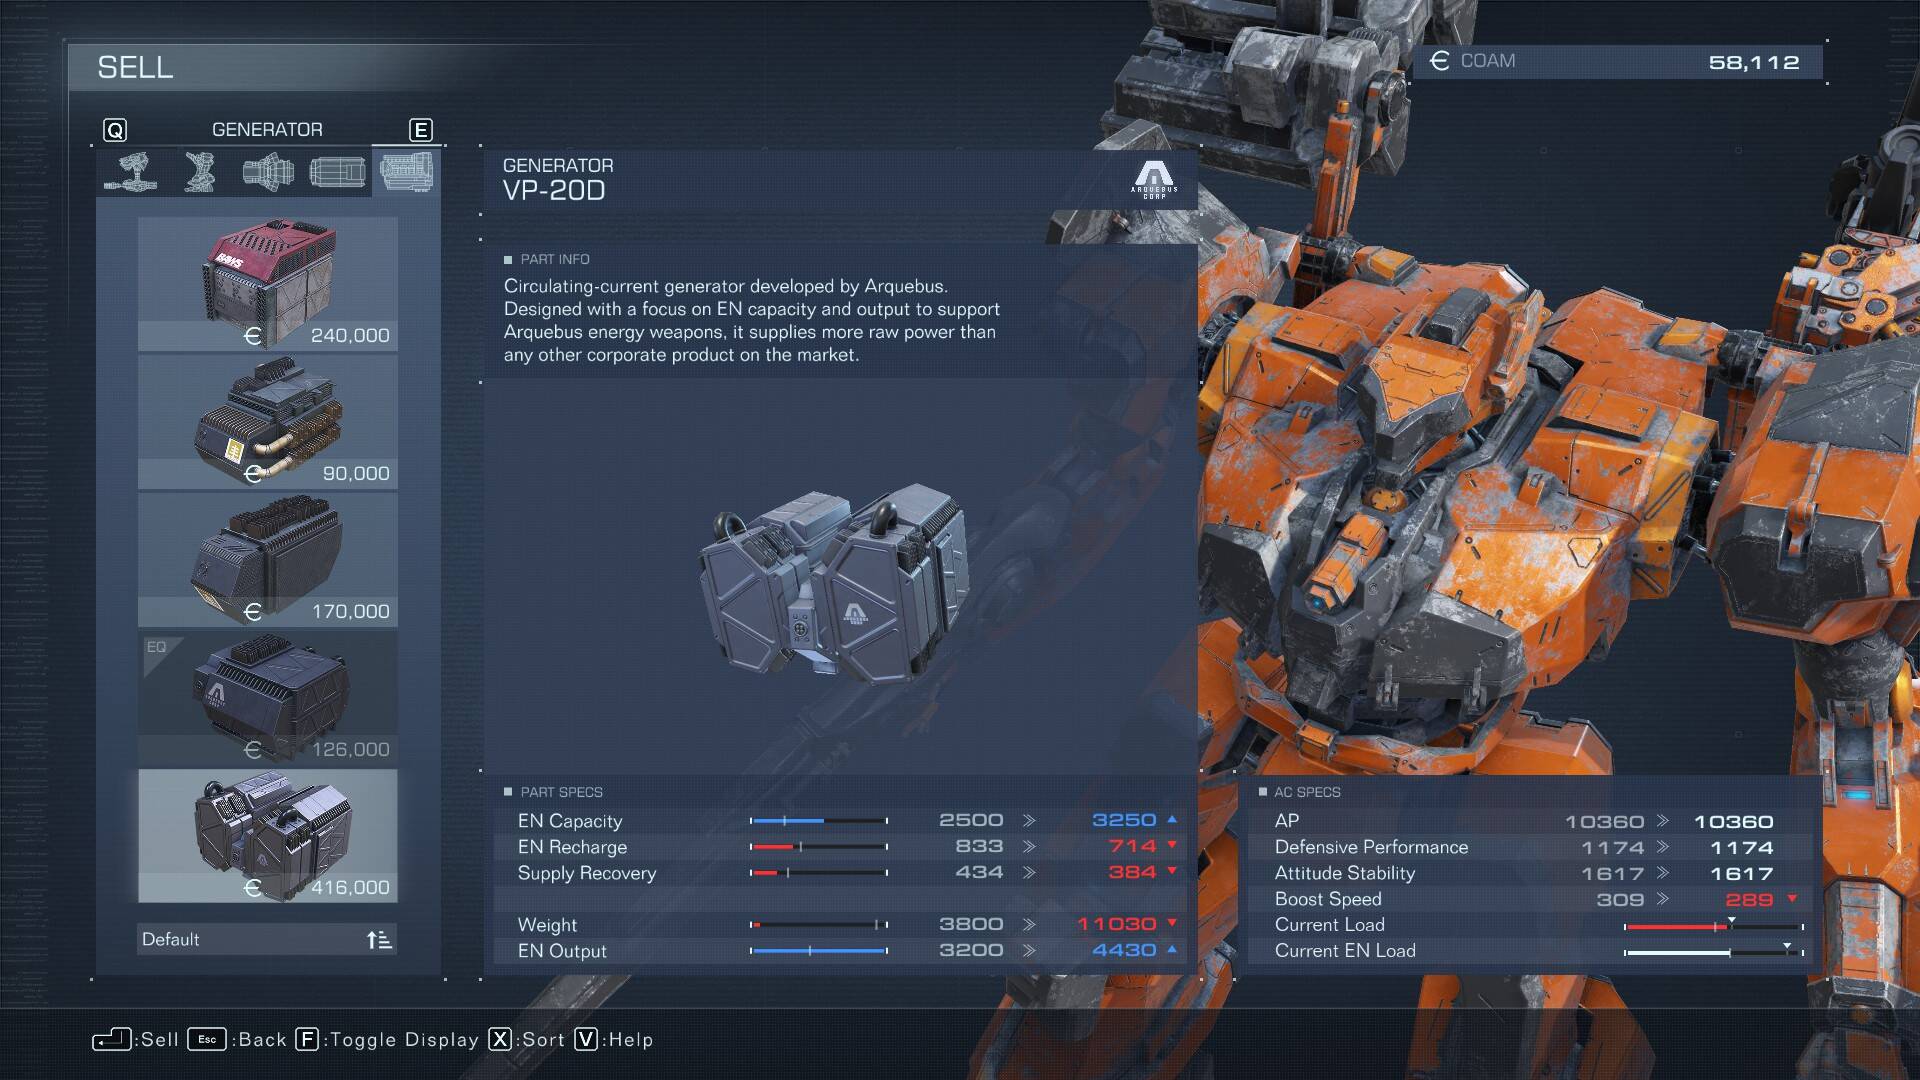 Selling a part for its full price in Armored Core 6.